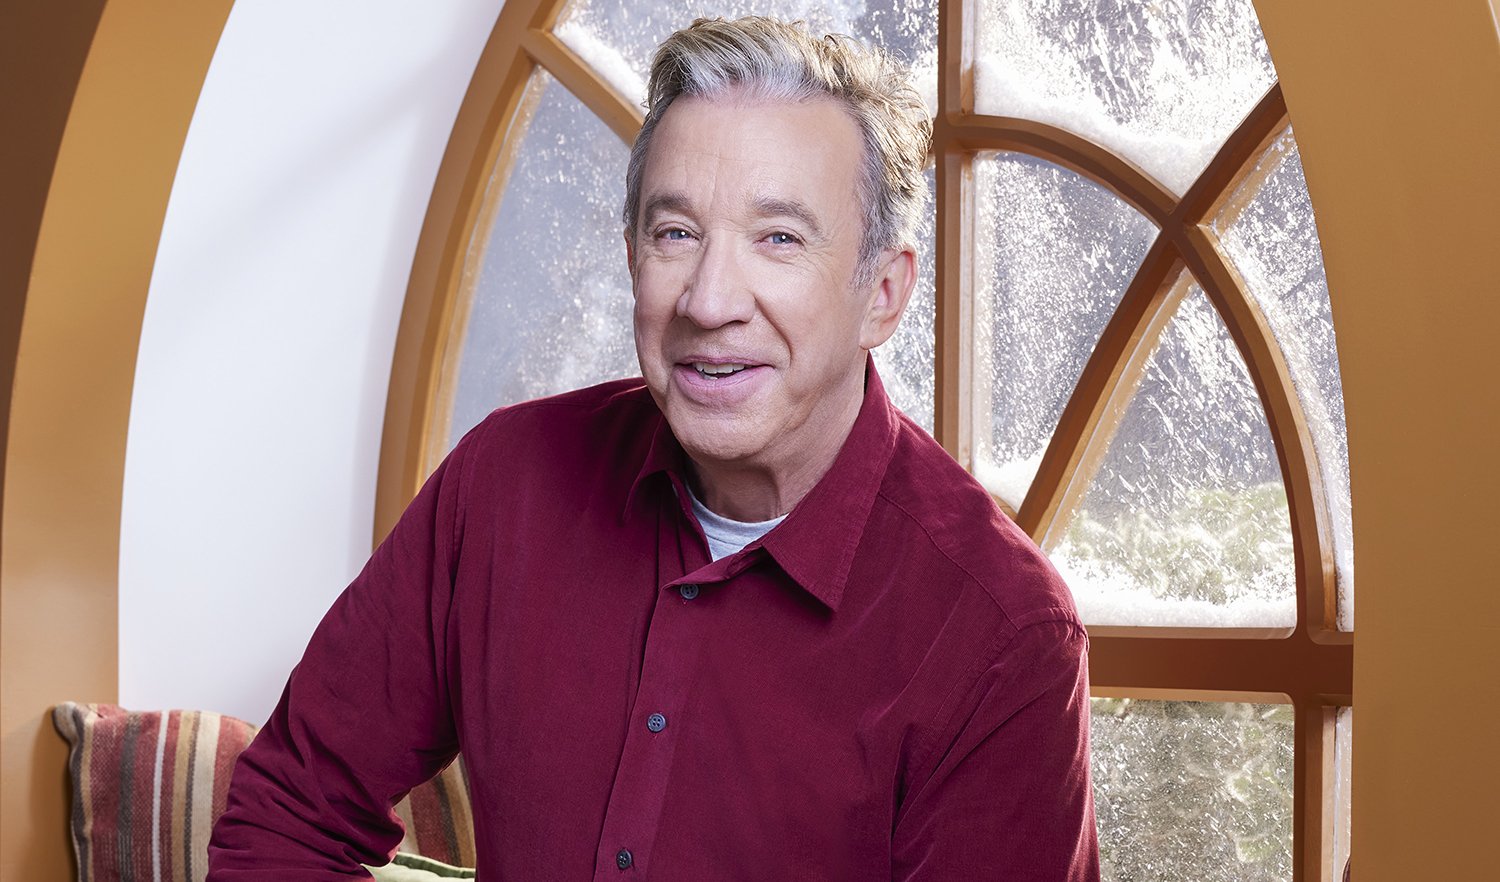 The Santa Clause cast member Tim Allen sits by a frosty window and smiles while wearing a maroon button-down shirt.